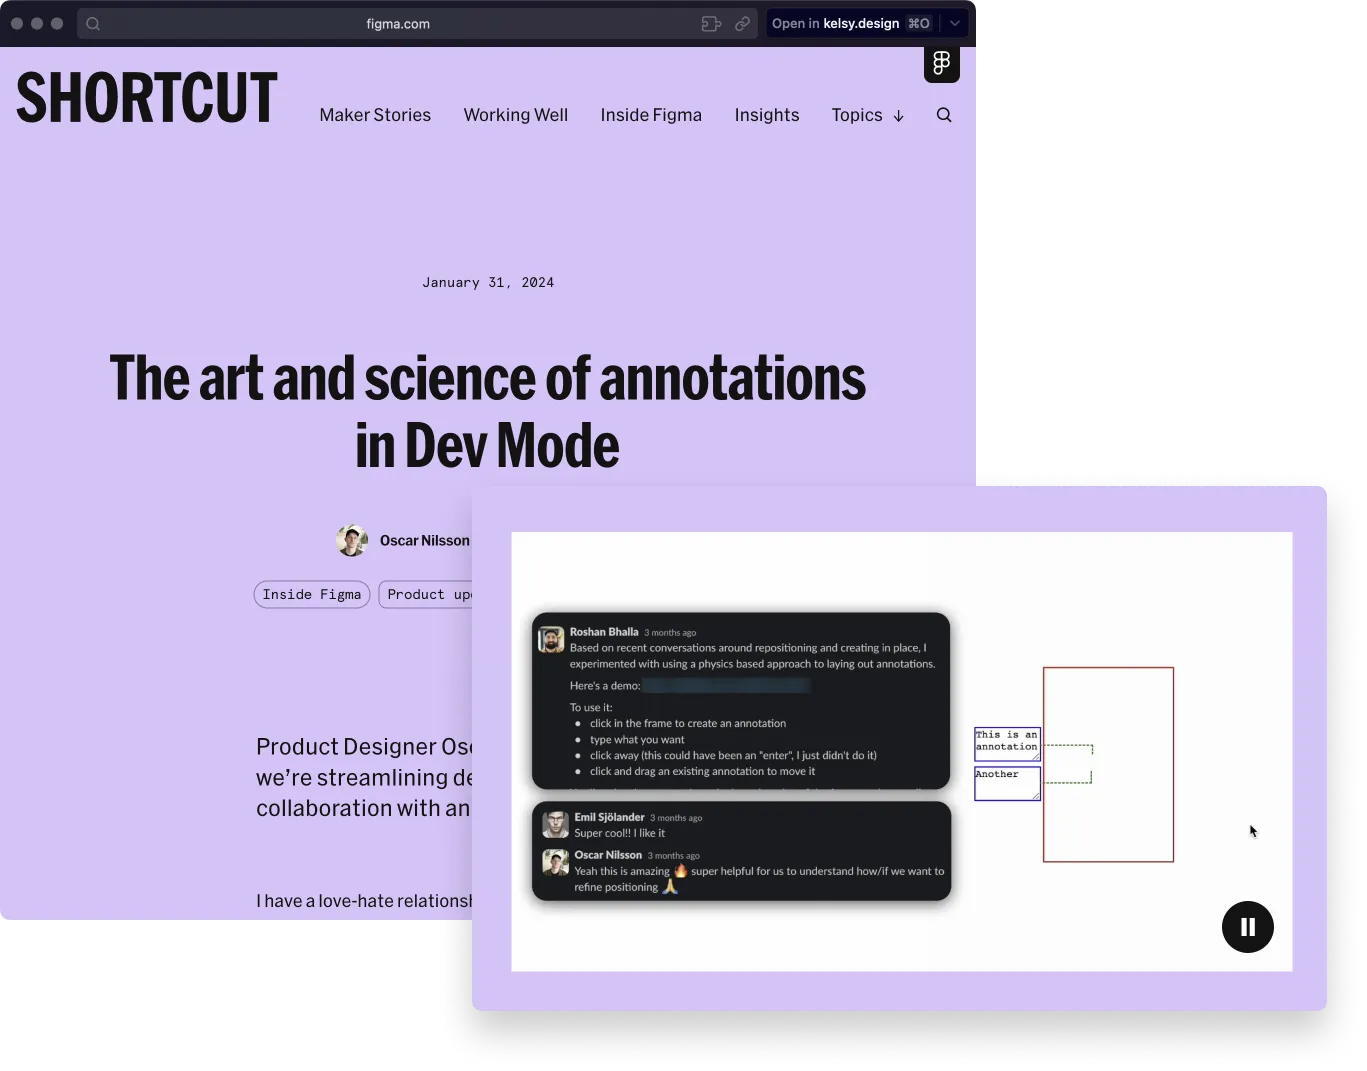 A screenshot of a webpage titled 'SHORTCUT' with an article about annotations in Dev Mode, featuring comments and a demonstration of annotation on a digital design frame